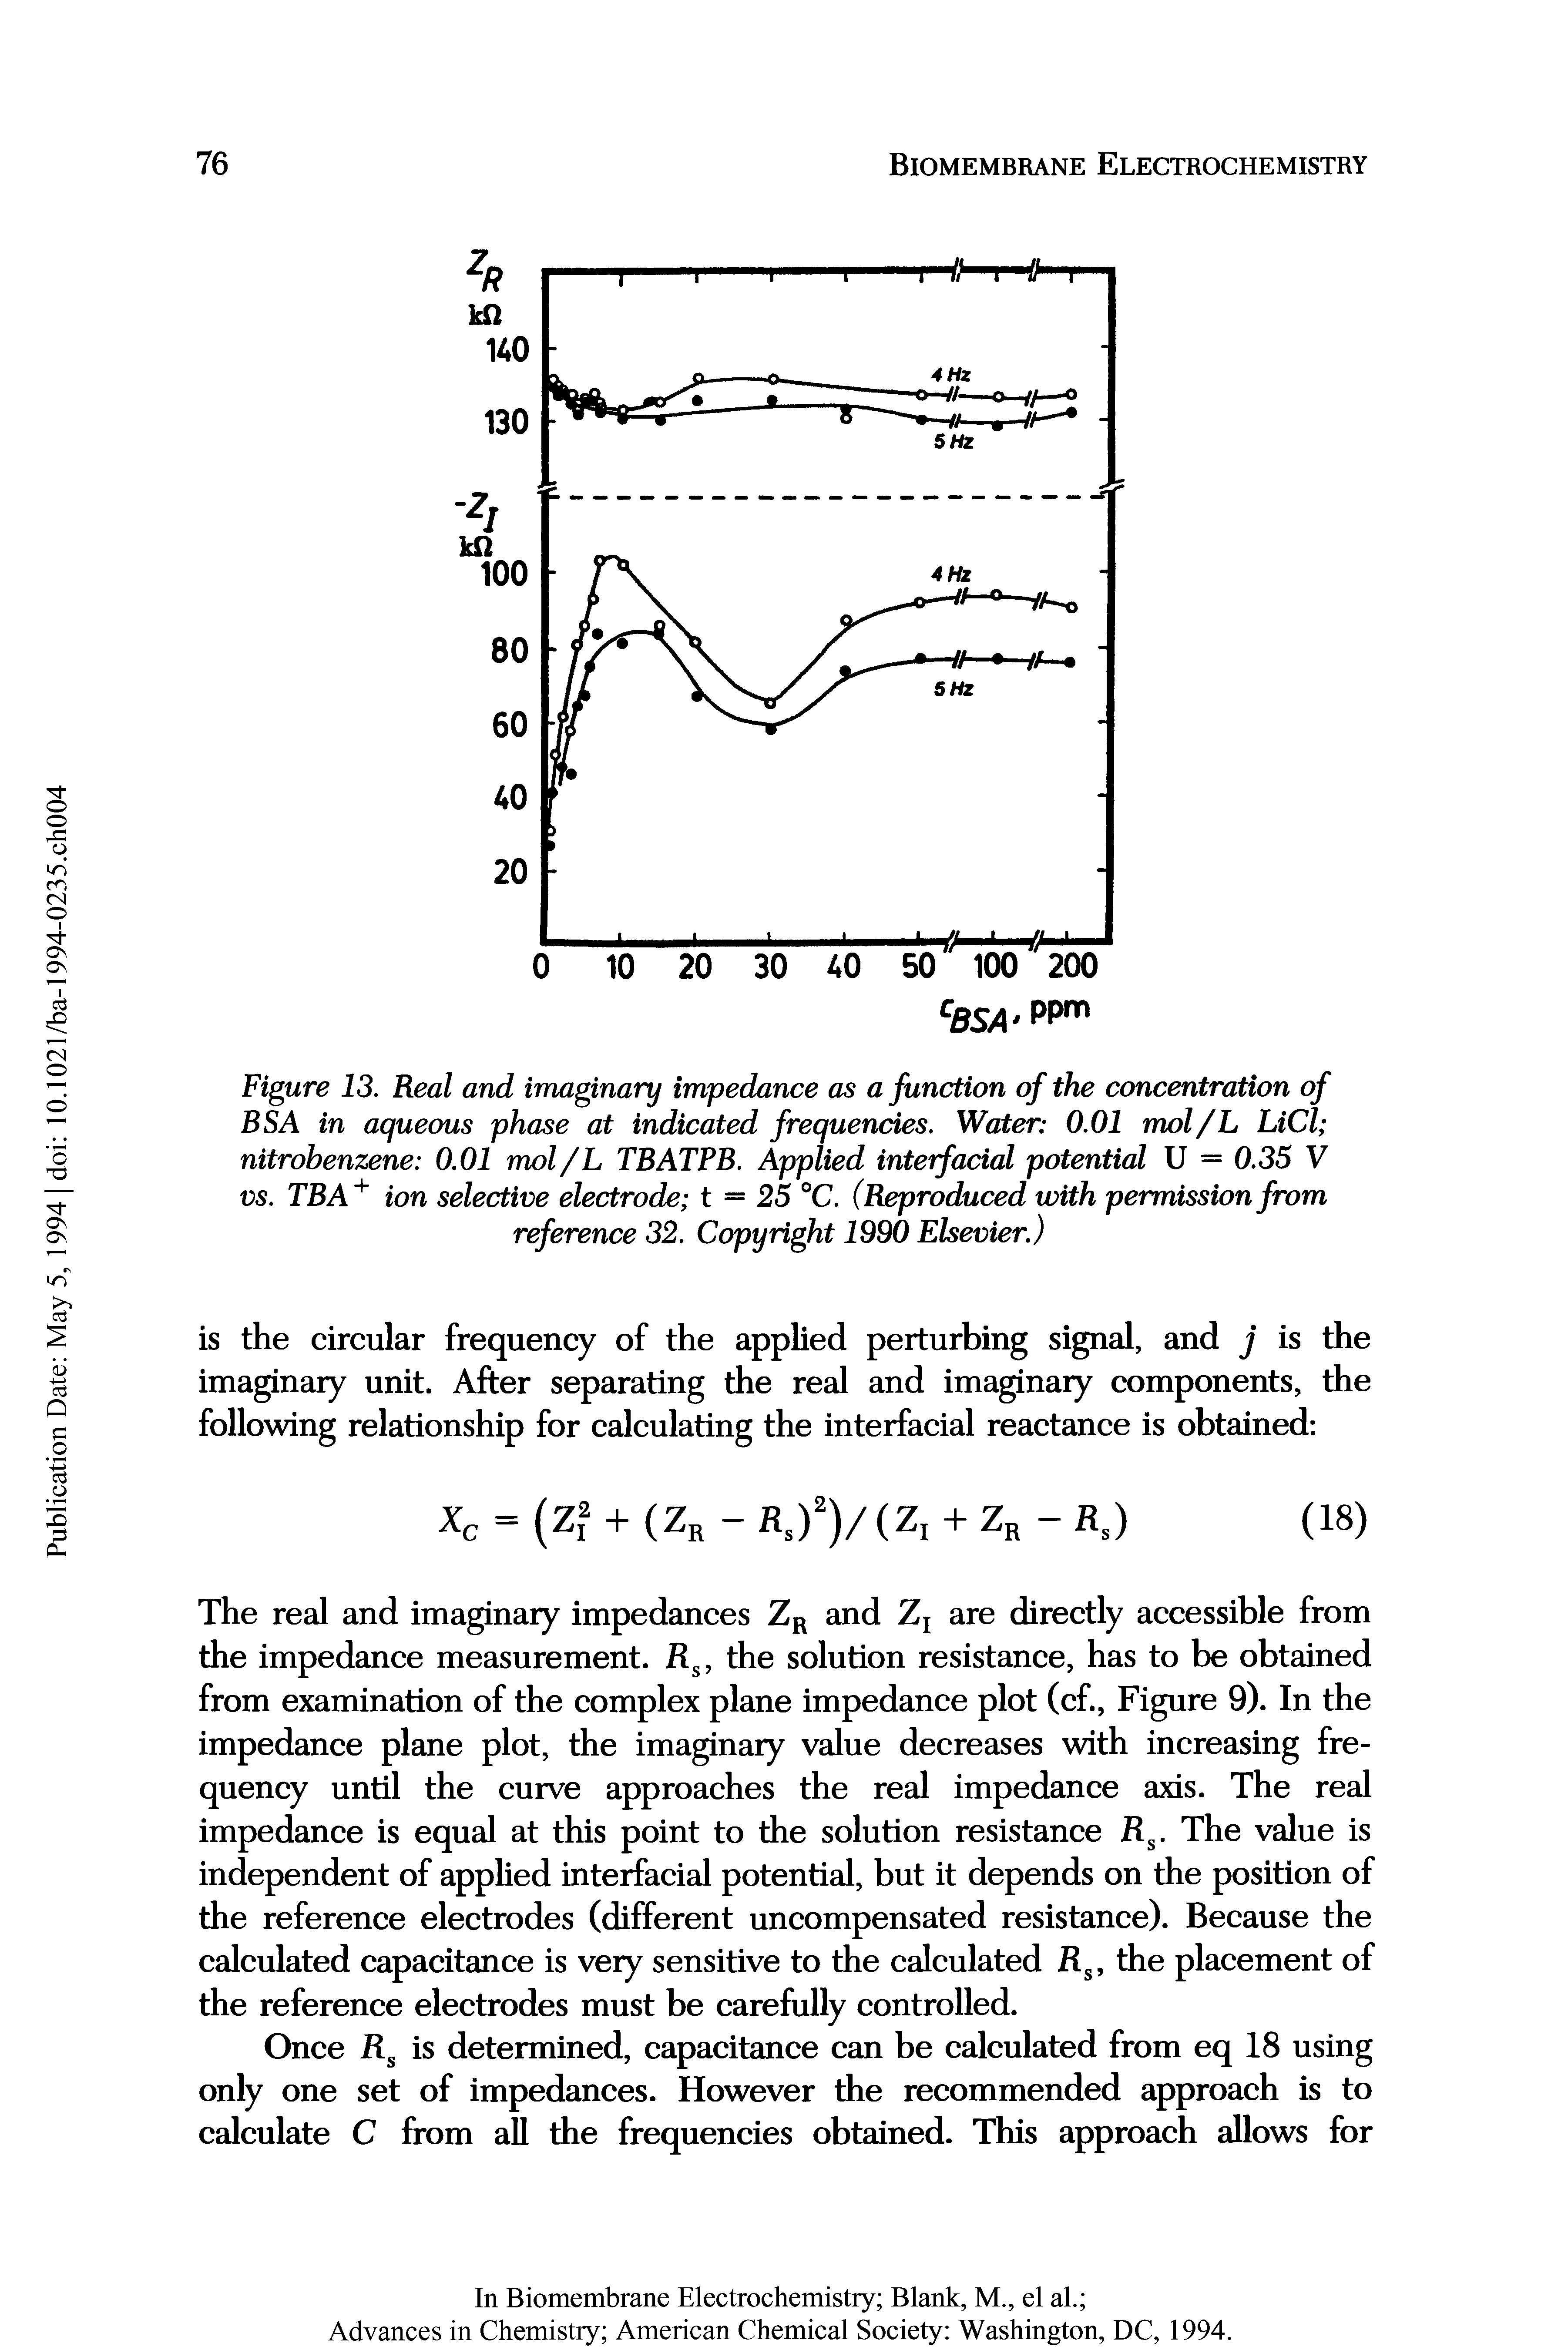 Figure 13. Real and imaginary impedance as a function of the concentration of BSA in aqueous phase at indicated frequencies. Water 0.01 mol/L LiCl nitrobenzene 0.01 mol/L TBATPB. Applied interfacial potential U = 0.35 V vs. TBA + ion selective electrode t — 25 °C. (Reproduced with permission from reference 32. Copyright 1990 Elsevier.)...